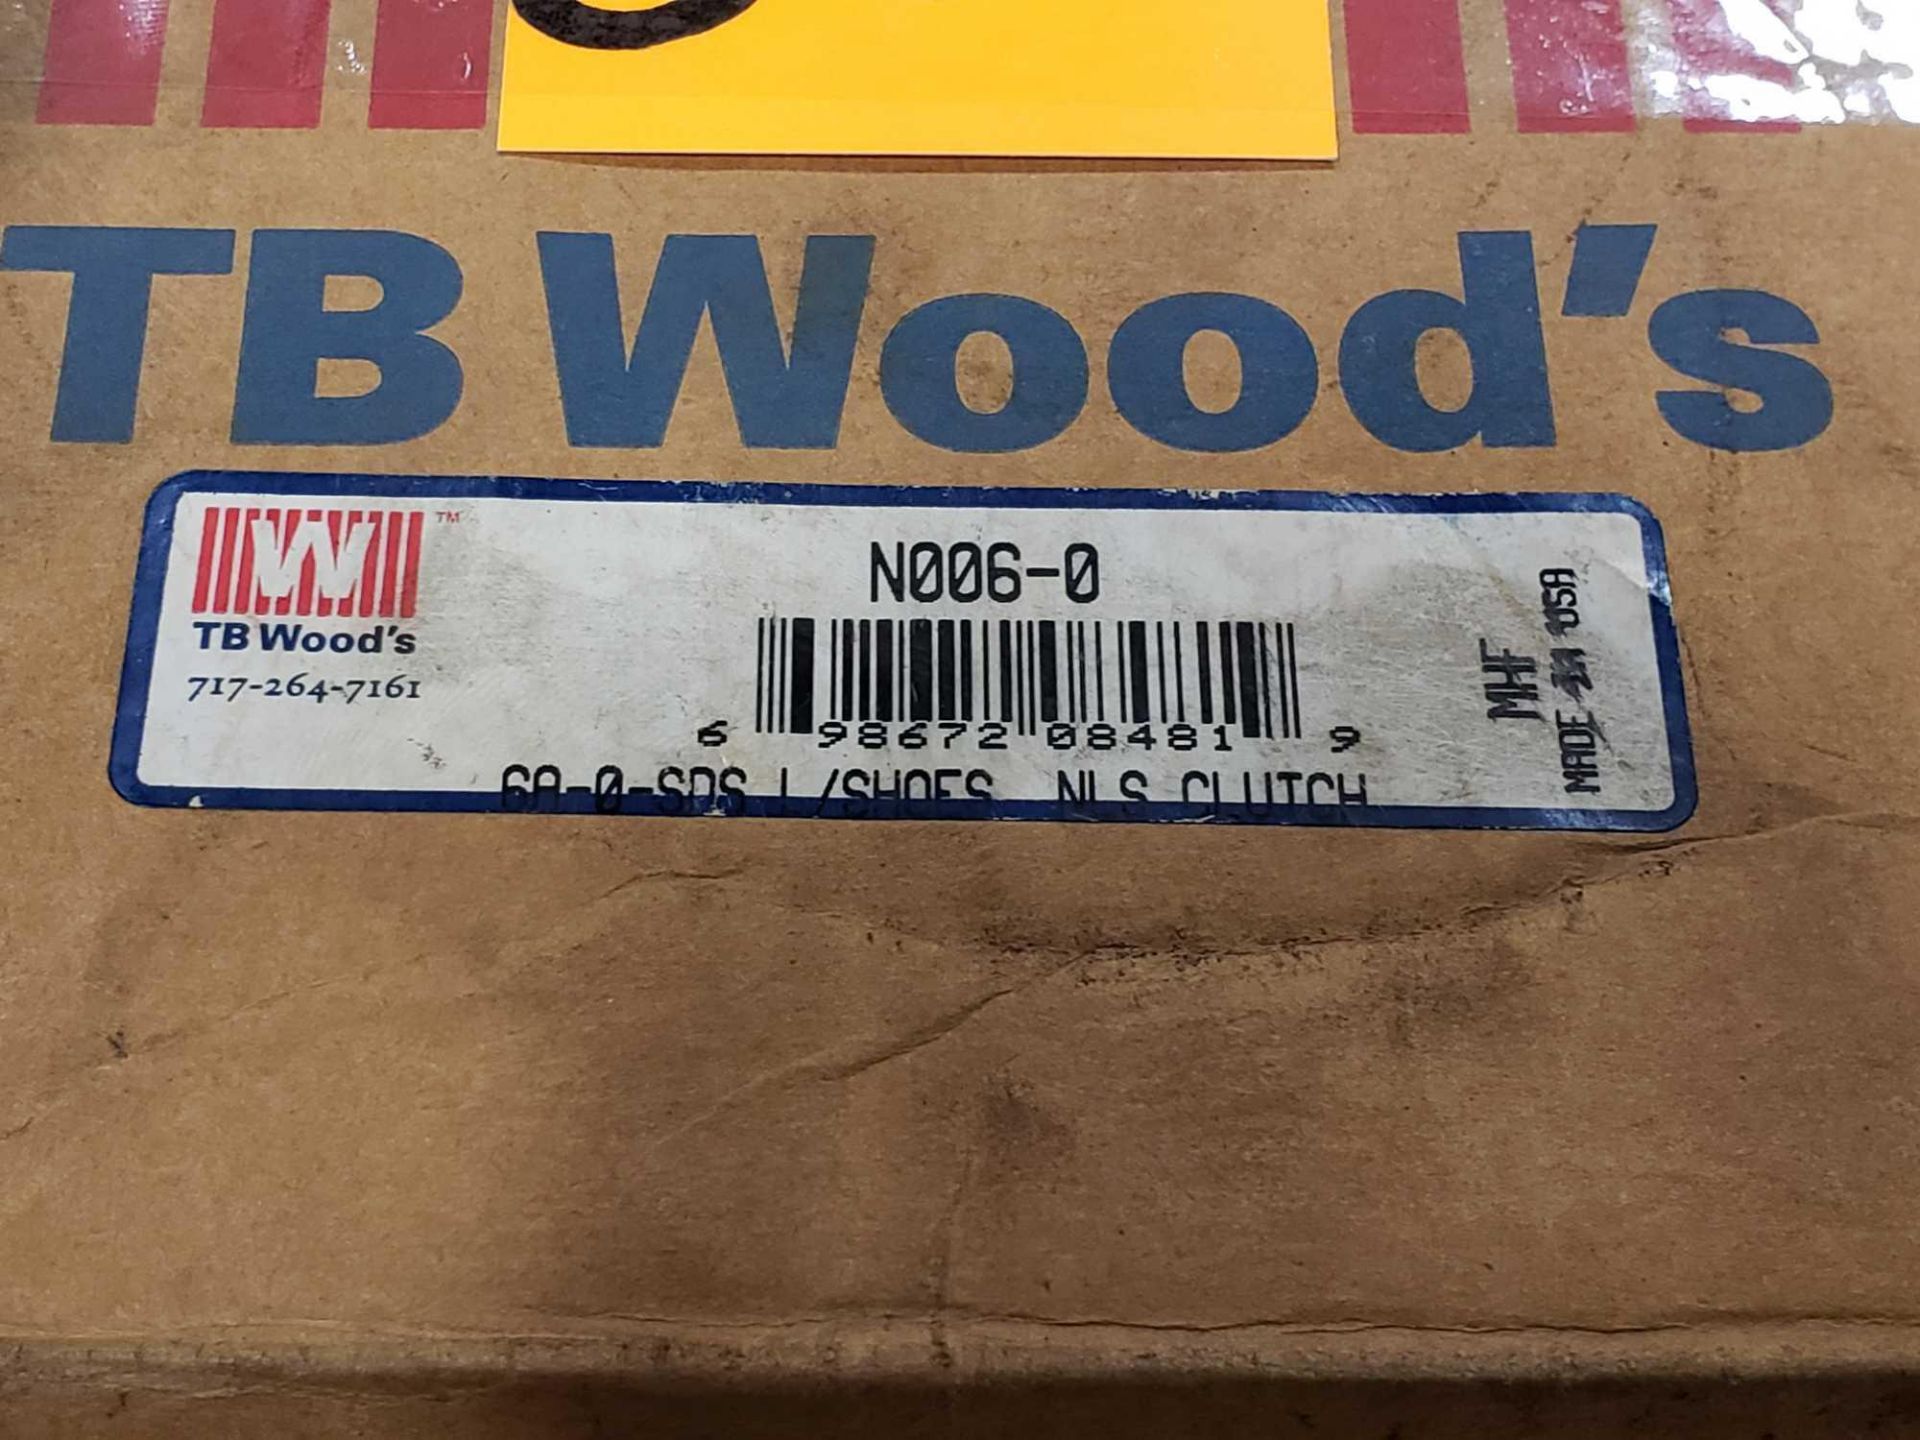 TB woods clutch shoes model N006-0. New in box. - Image 2 of 2